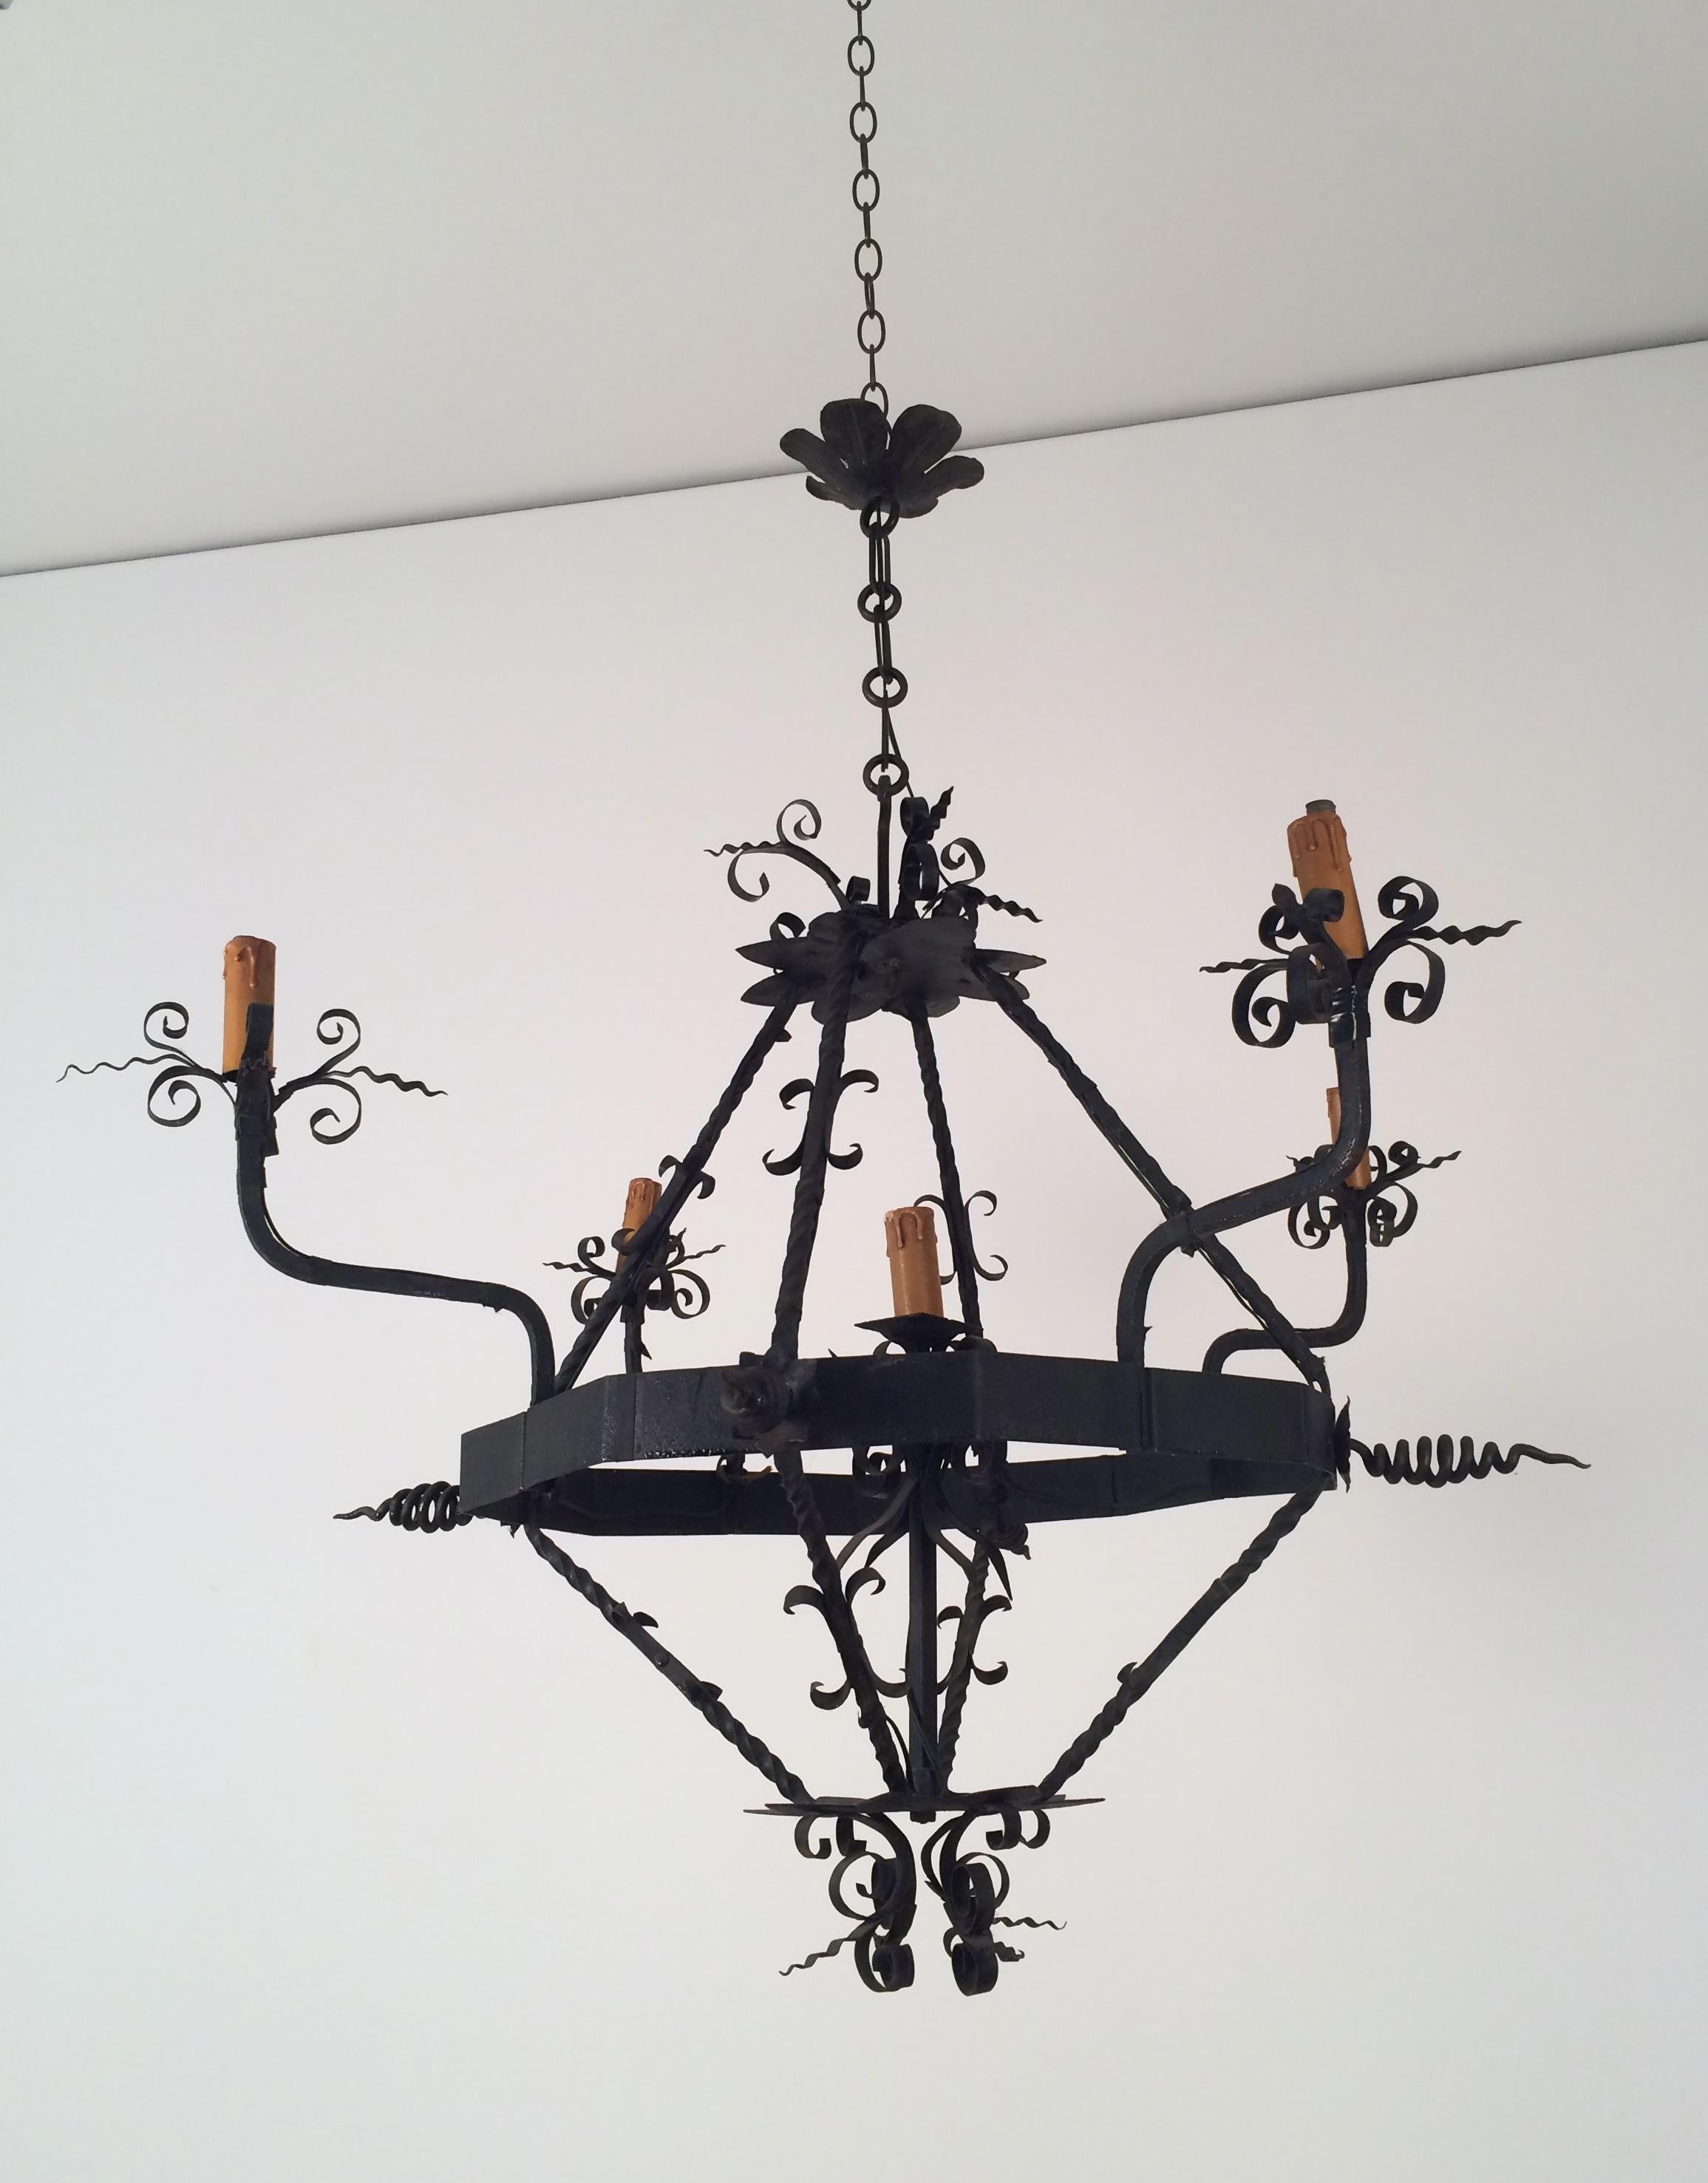 Gothic Wrought Iron Chandelier with 5 Lights, French, circa 1940